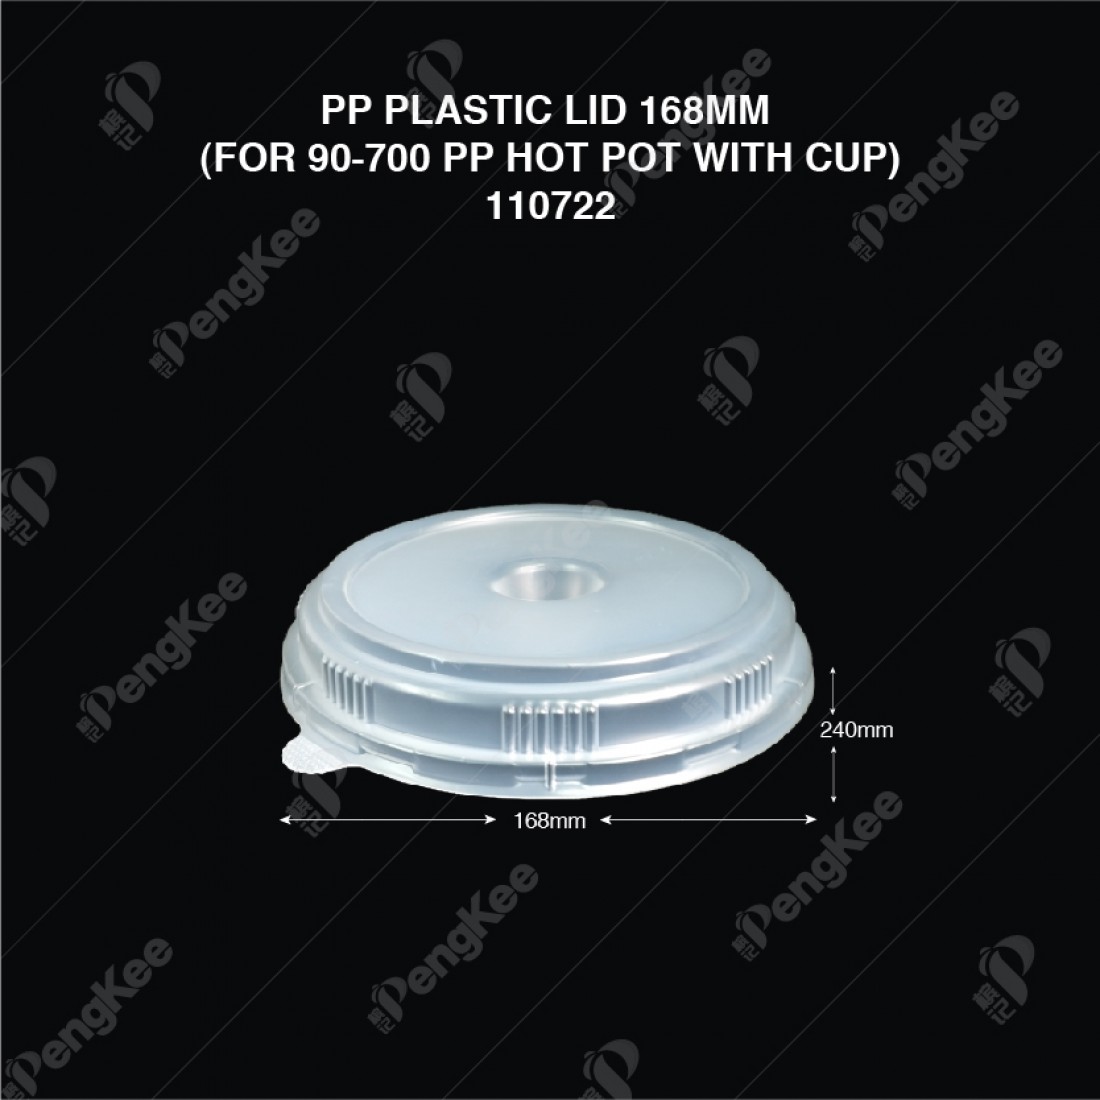 PP PLASTIC LID 168MM (FOR 90-700 PP HOT POT WITH CUP) PC